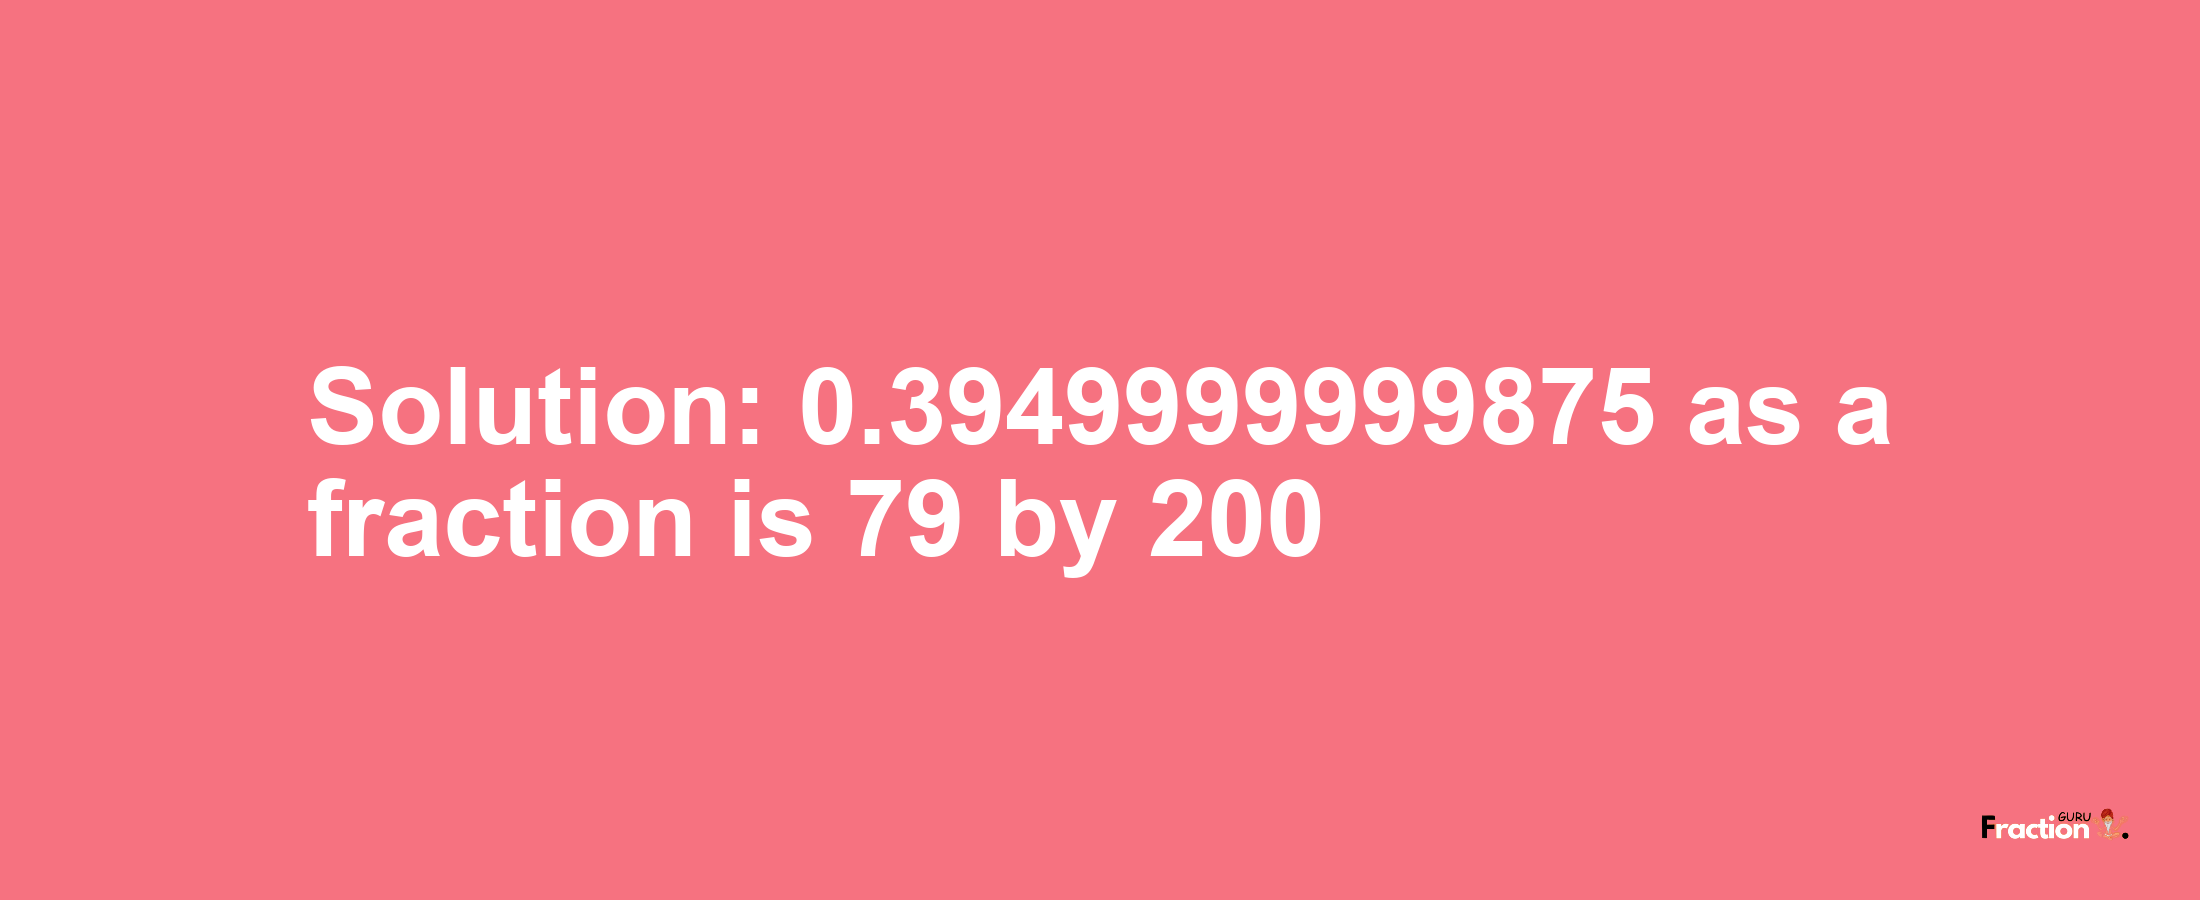 Solution:0.3949999999875 as a fraction is 79/200